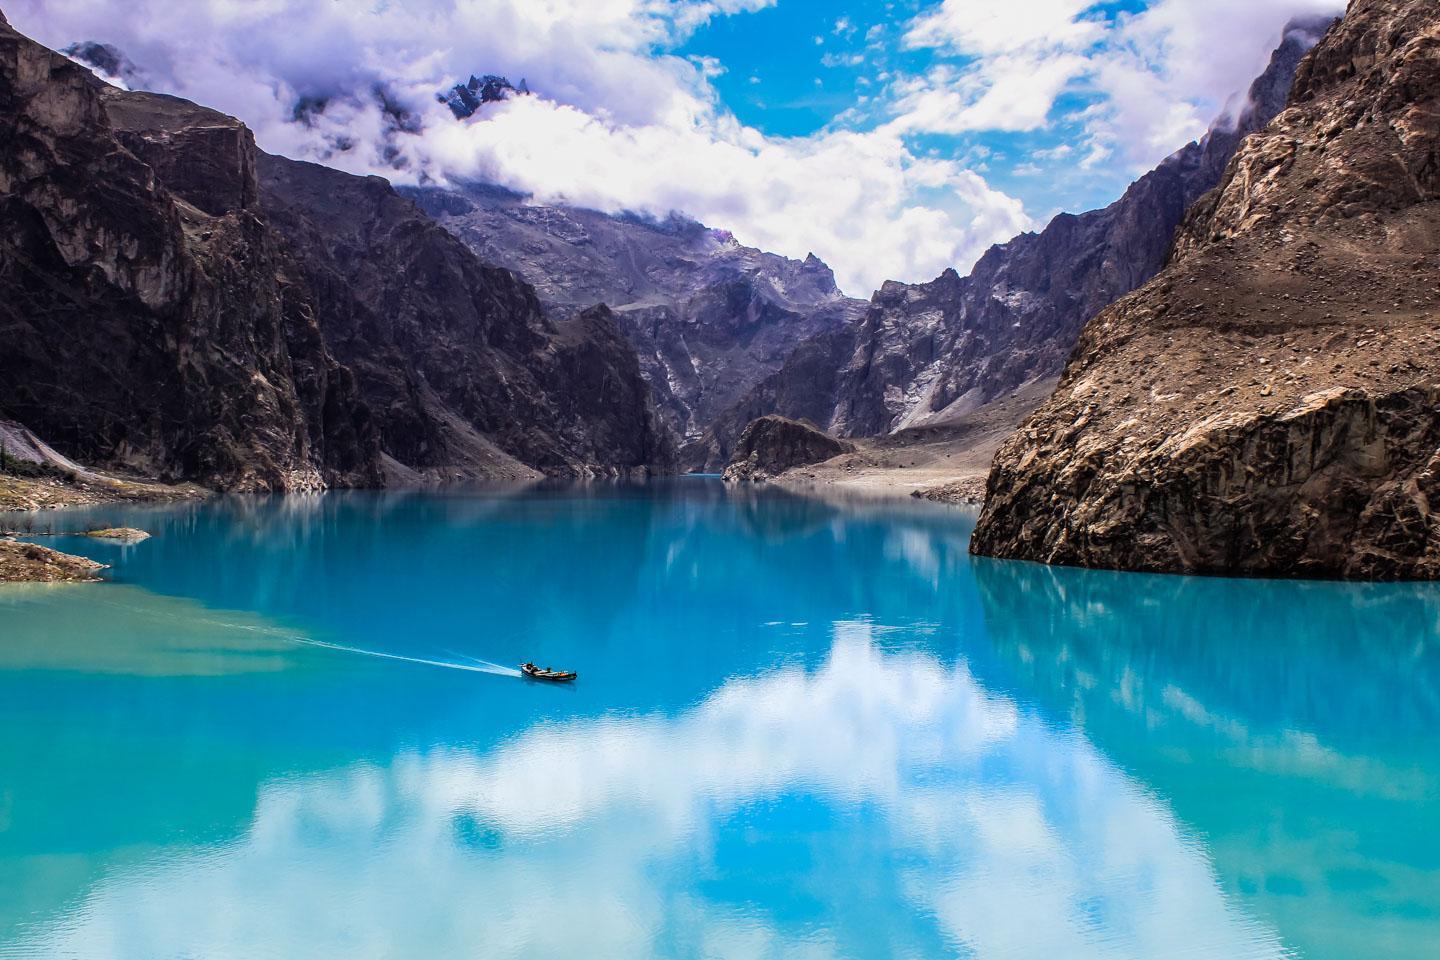 Awe-inspiring Attabad Lake that bedazzles every visitor